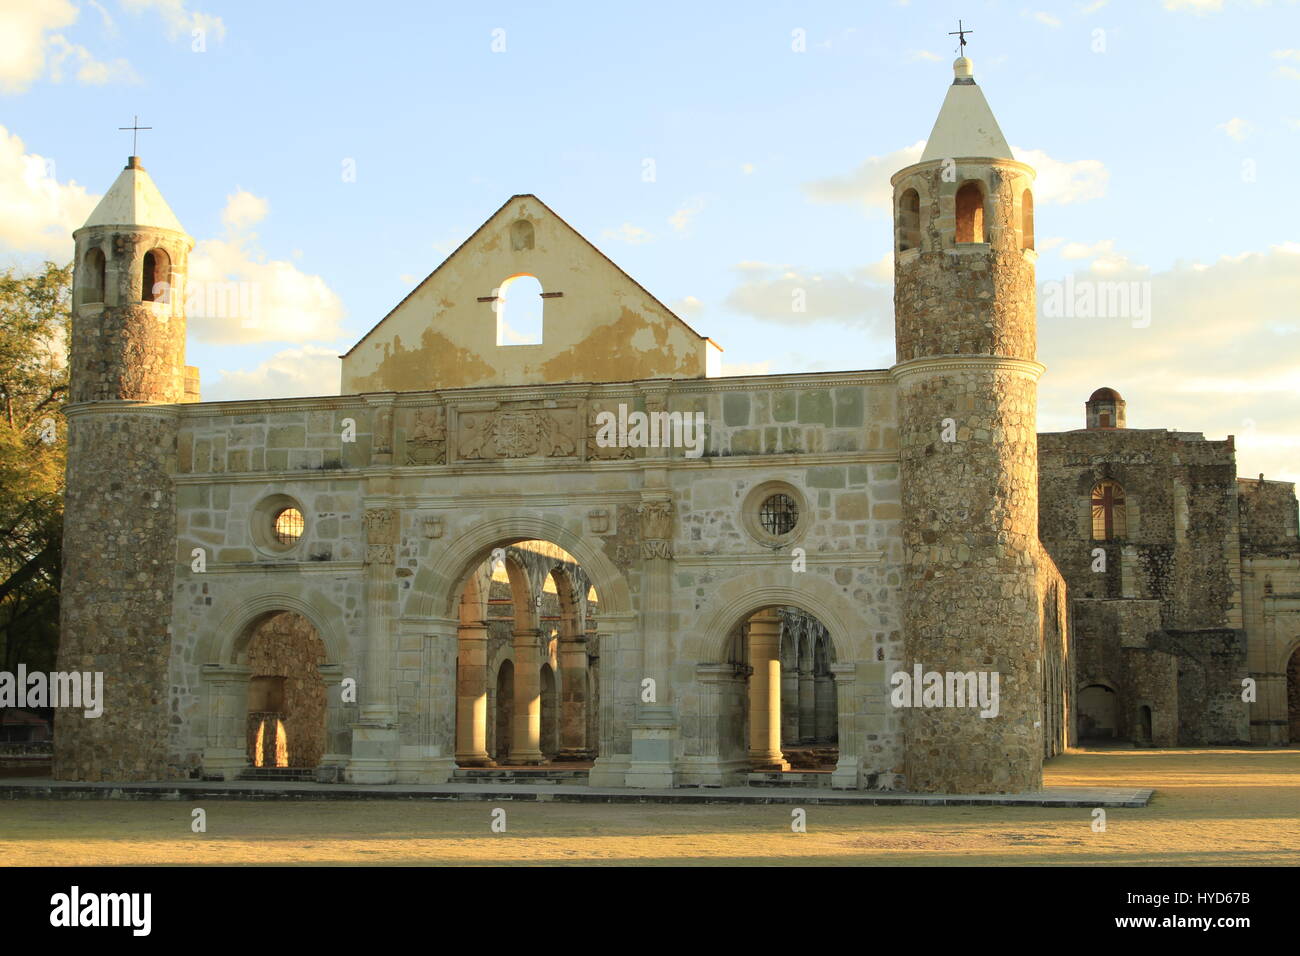 Front view of the Ex-monastery of Santiago Apóstol in afternoon light, Oaxaca, Mexico Stock Photo